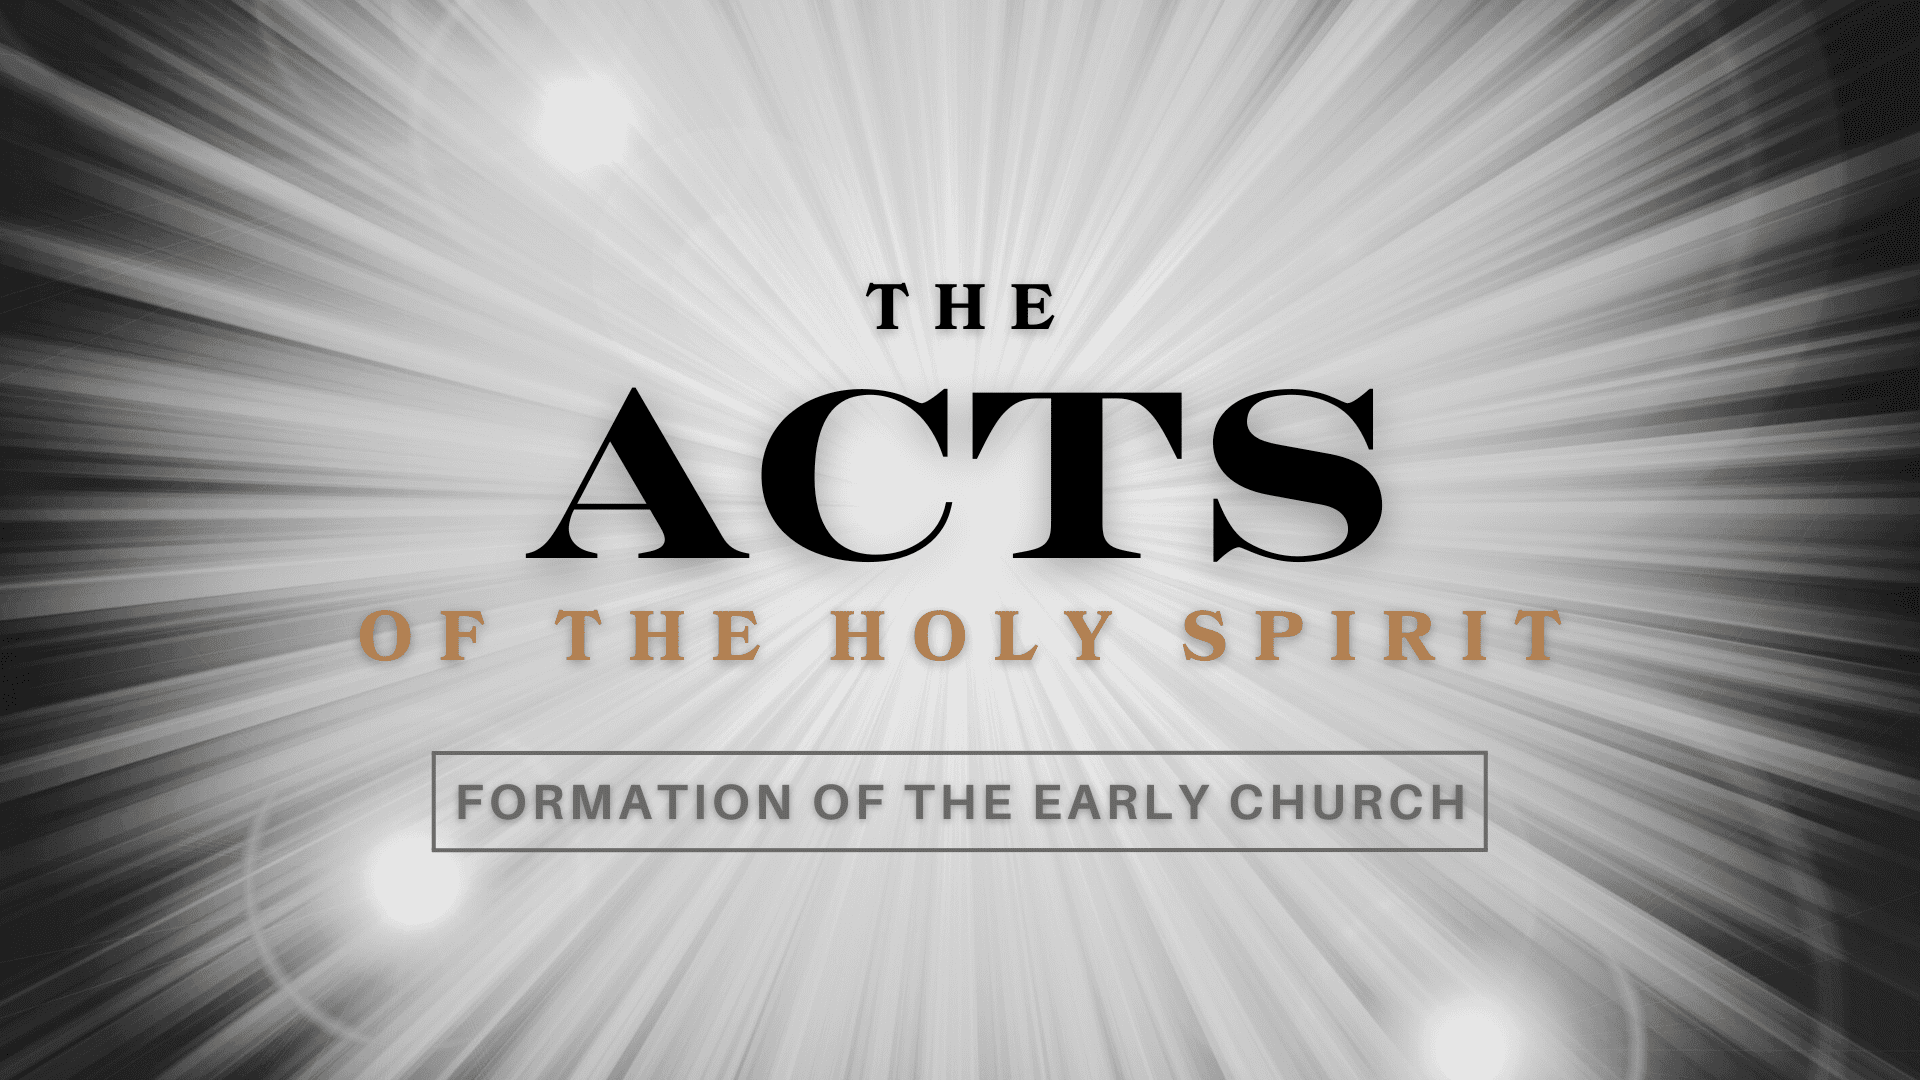 SERMON | Acts 2:1-21 | Filled with the Spirit not spirits